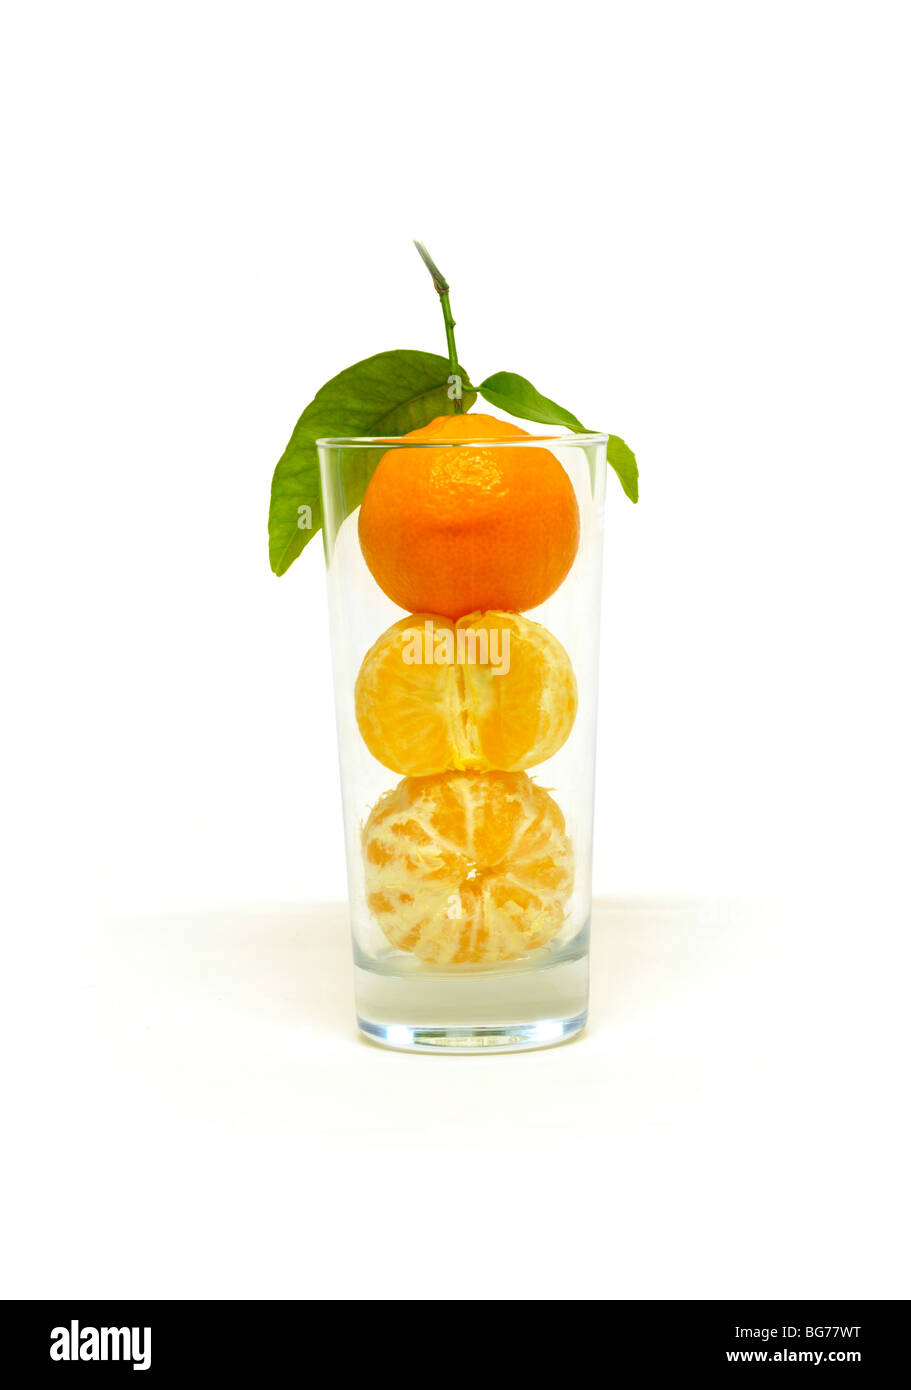 Whole peeled and unpeeled oranges stacked on one another within a glass tumbler. Stock Photo